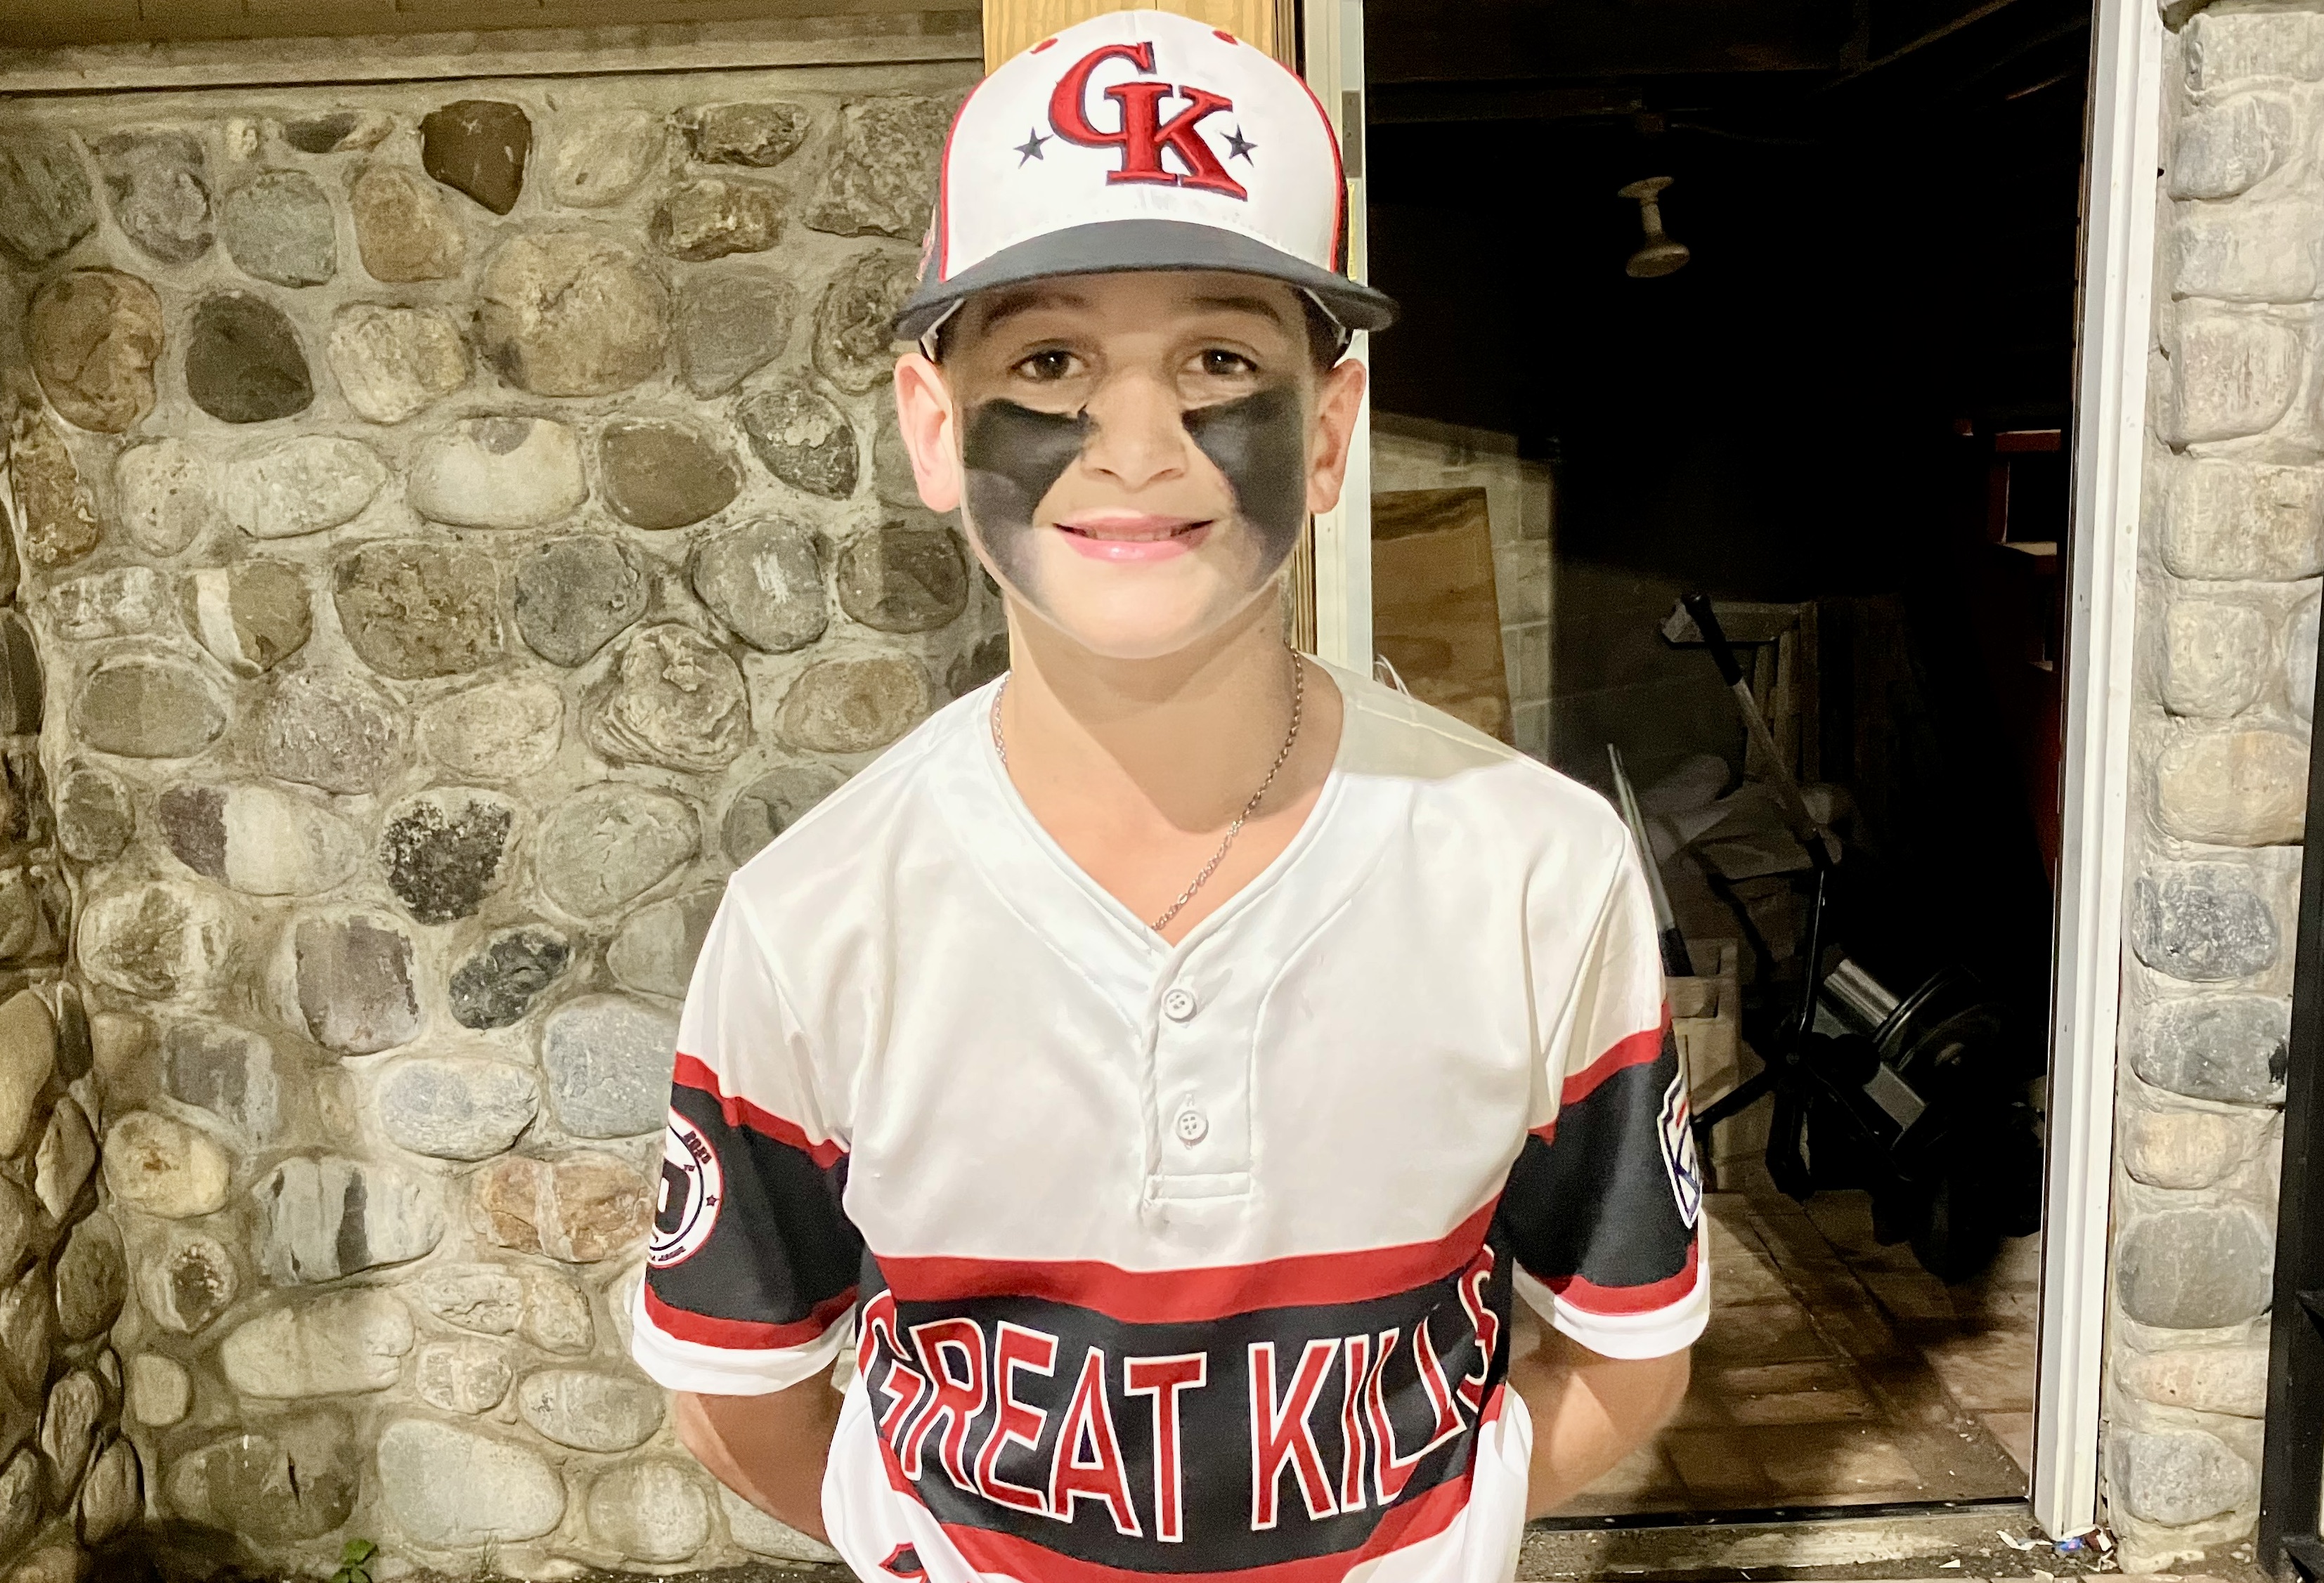 LL All-Star baseball: Great Kills finally got the chance to unveil new  uniforms 